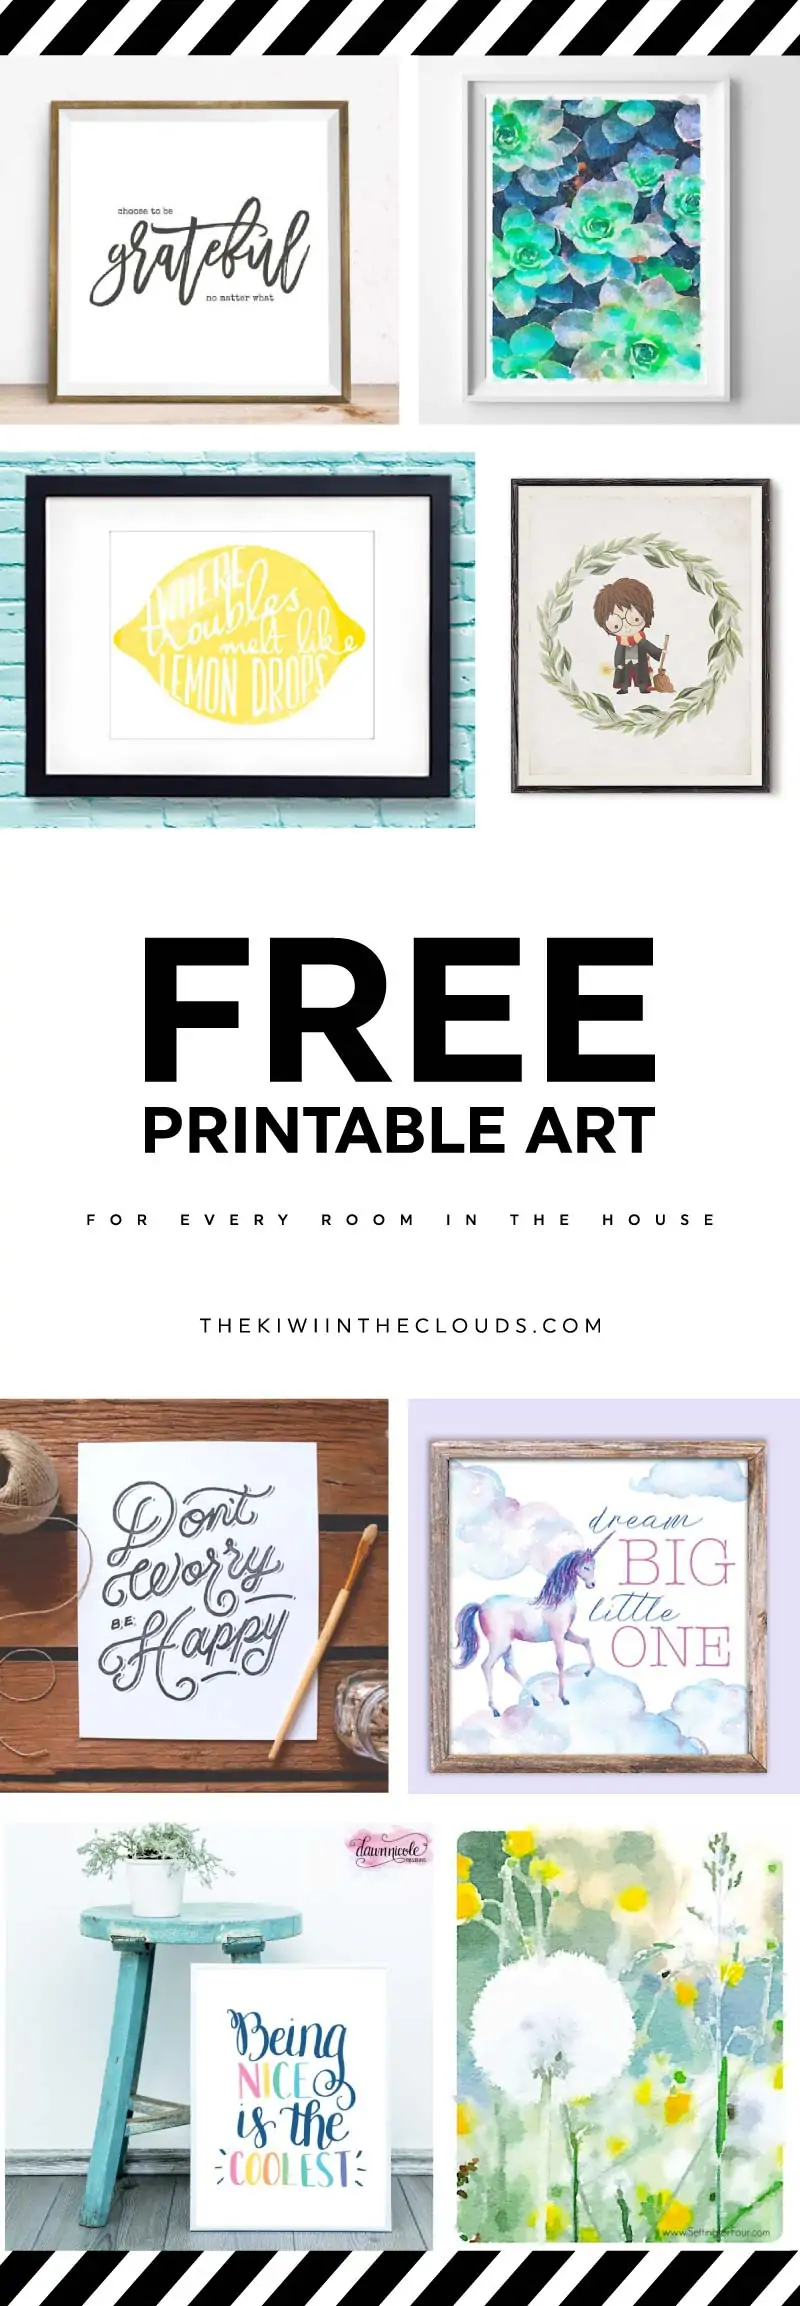 21 Free Printable Art Prints To Quickly Decorate The Barest Of Walls